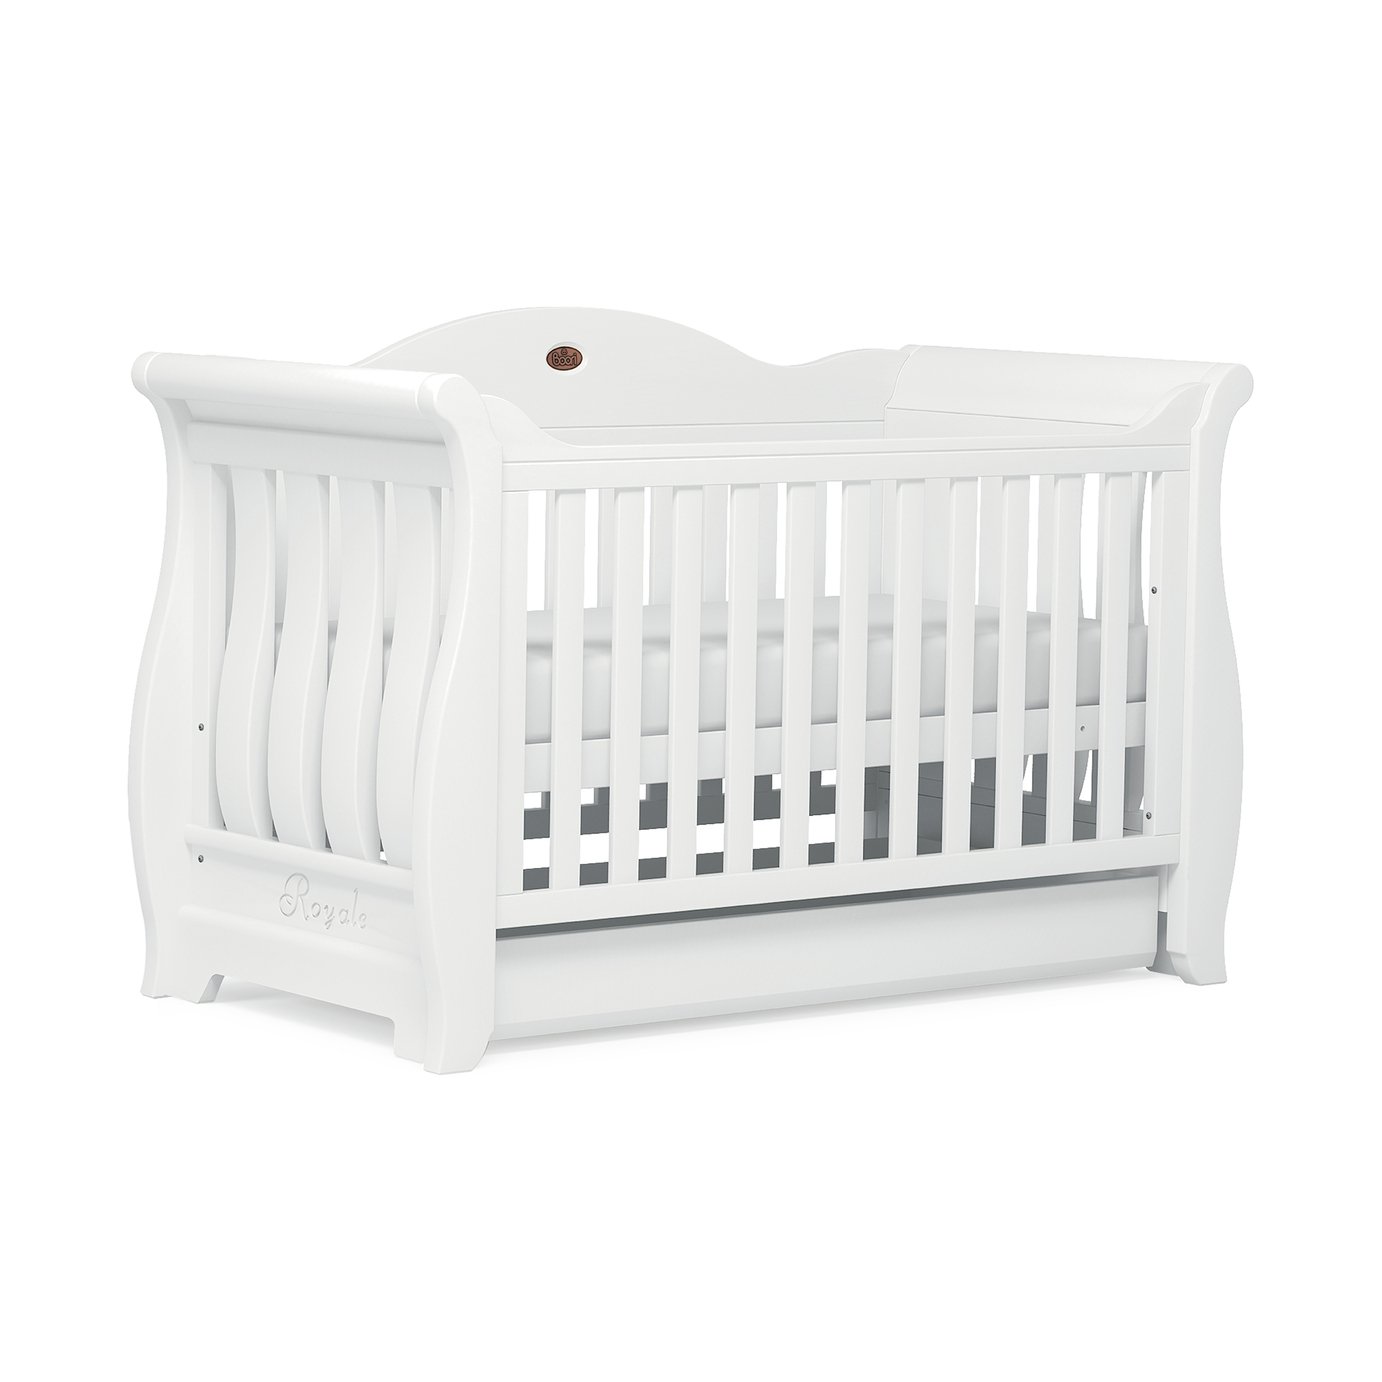 Boori Sleigh Royale Baby Cot Bed and Drawer Review